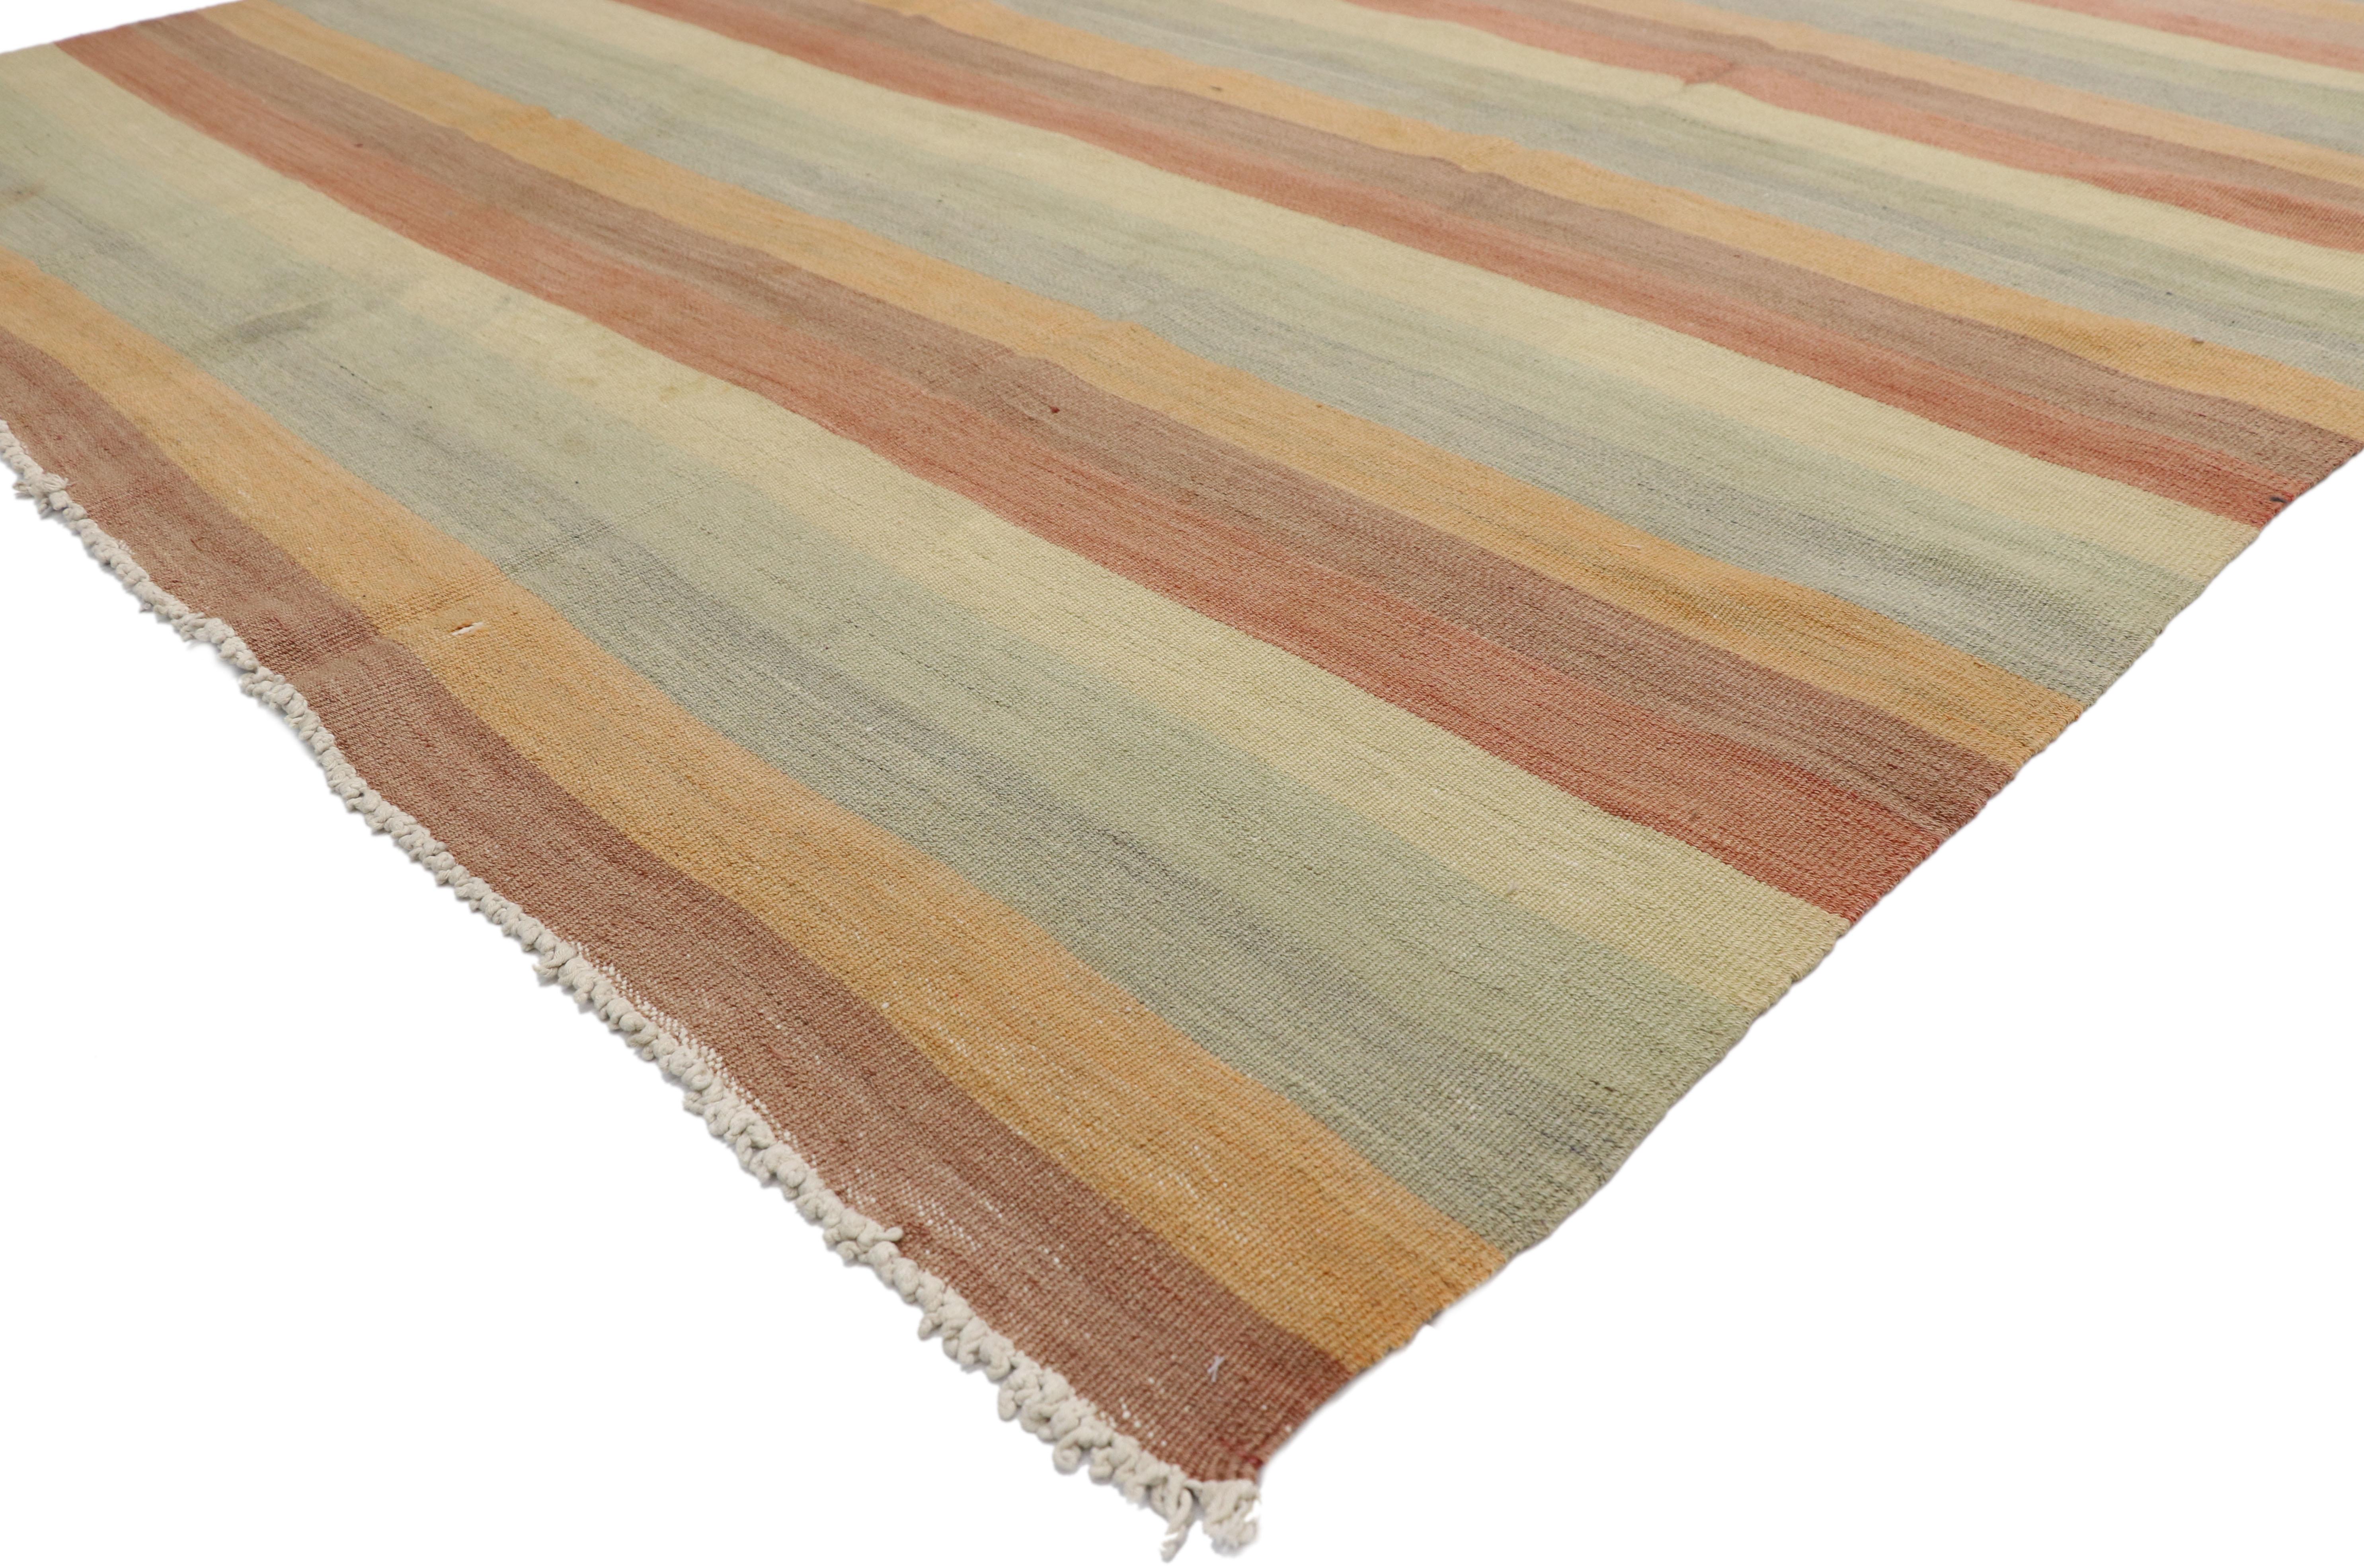 Hand-Woven Vintage Turkish Striped Kilim Rug with Soft Colors, Flat-Weave Rug